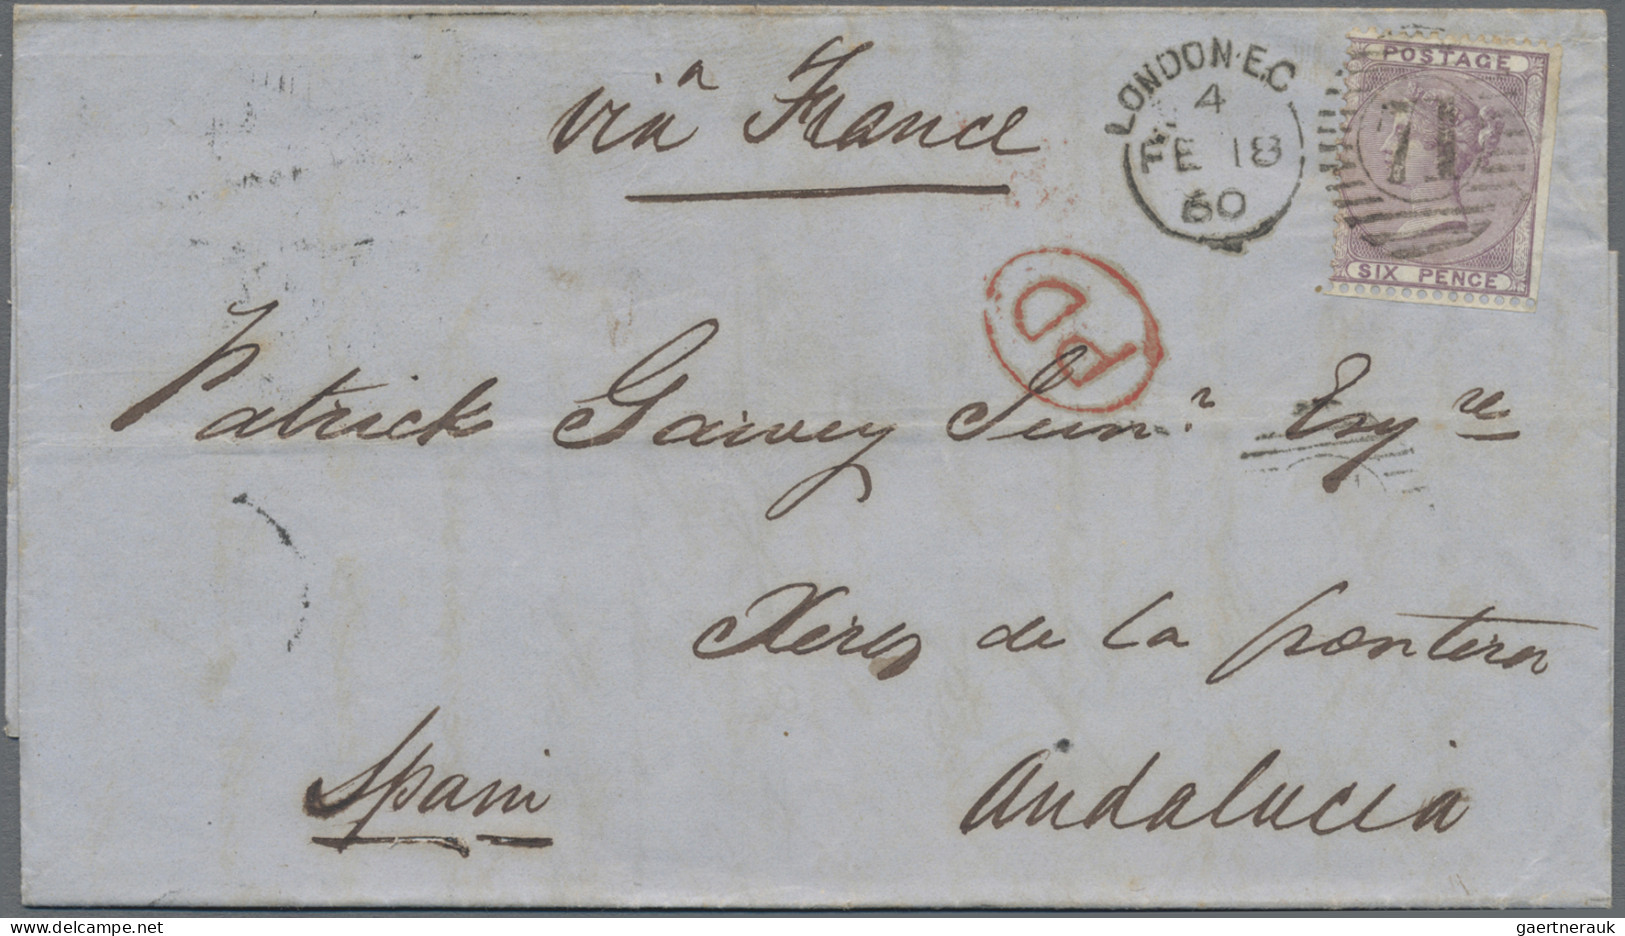 Great Britain: 1836/1900 ca.- Destination SPAIN: Group of 15 letters, covers and